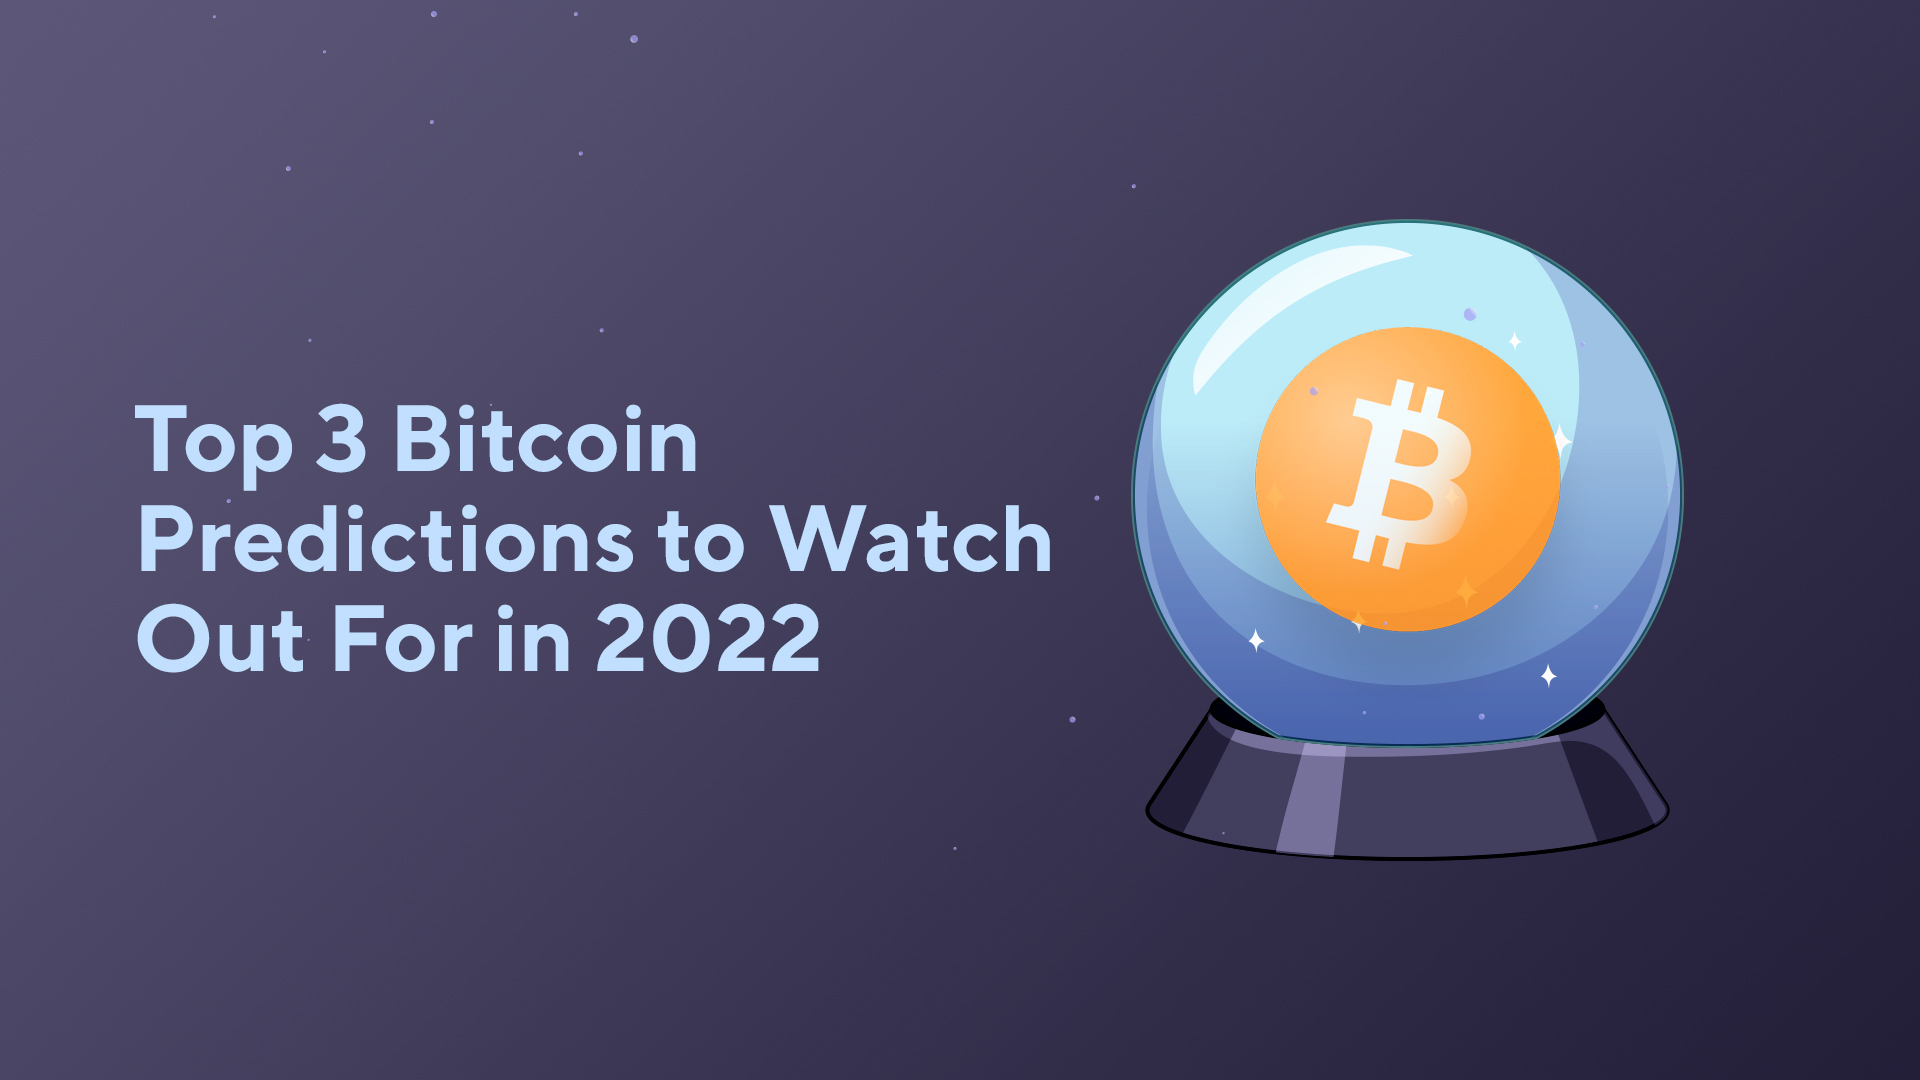 Top 3 Bitcoin Predictions to Watch Out For in 2022